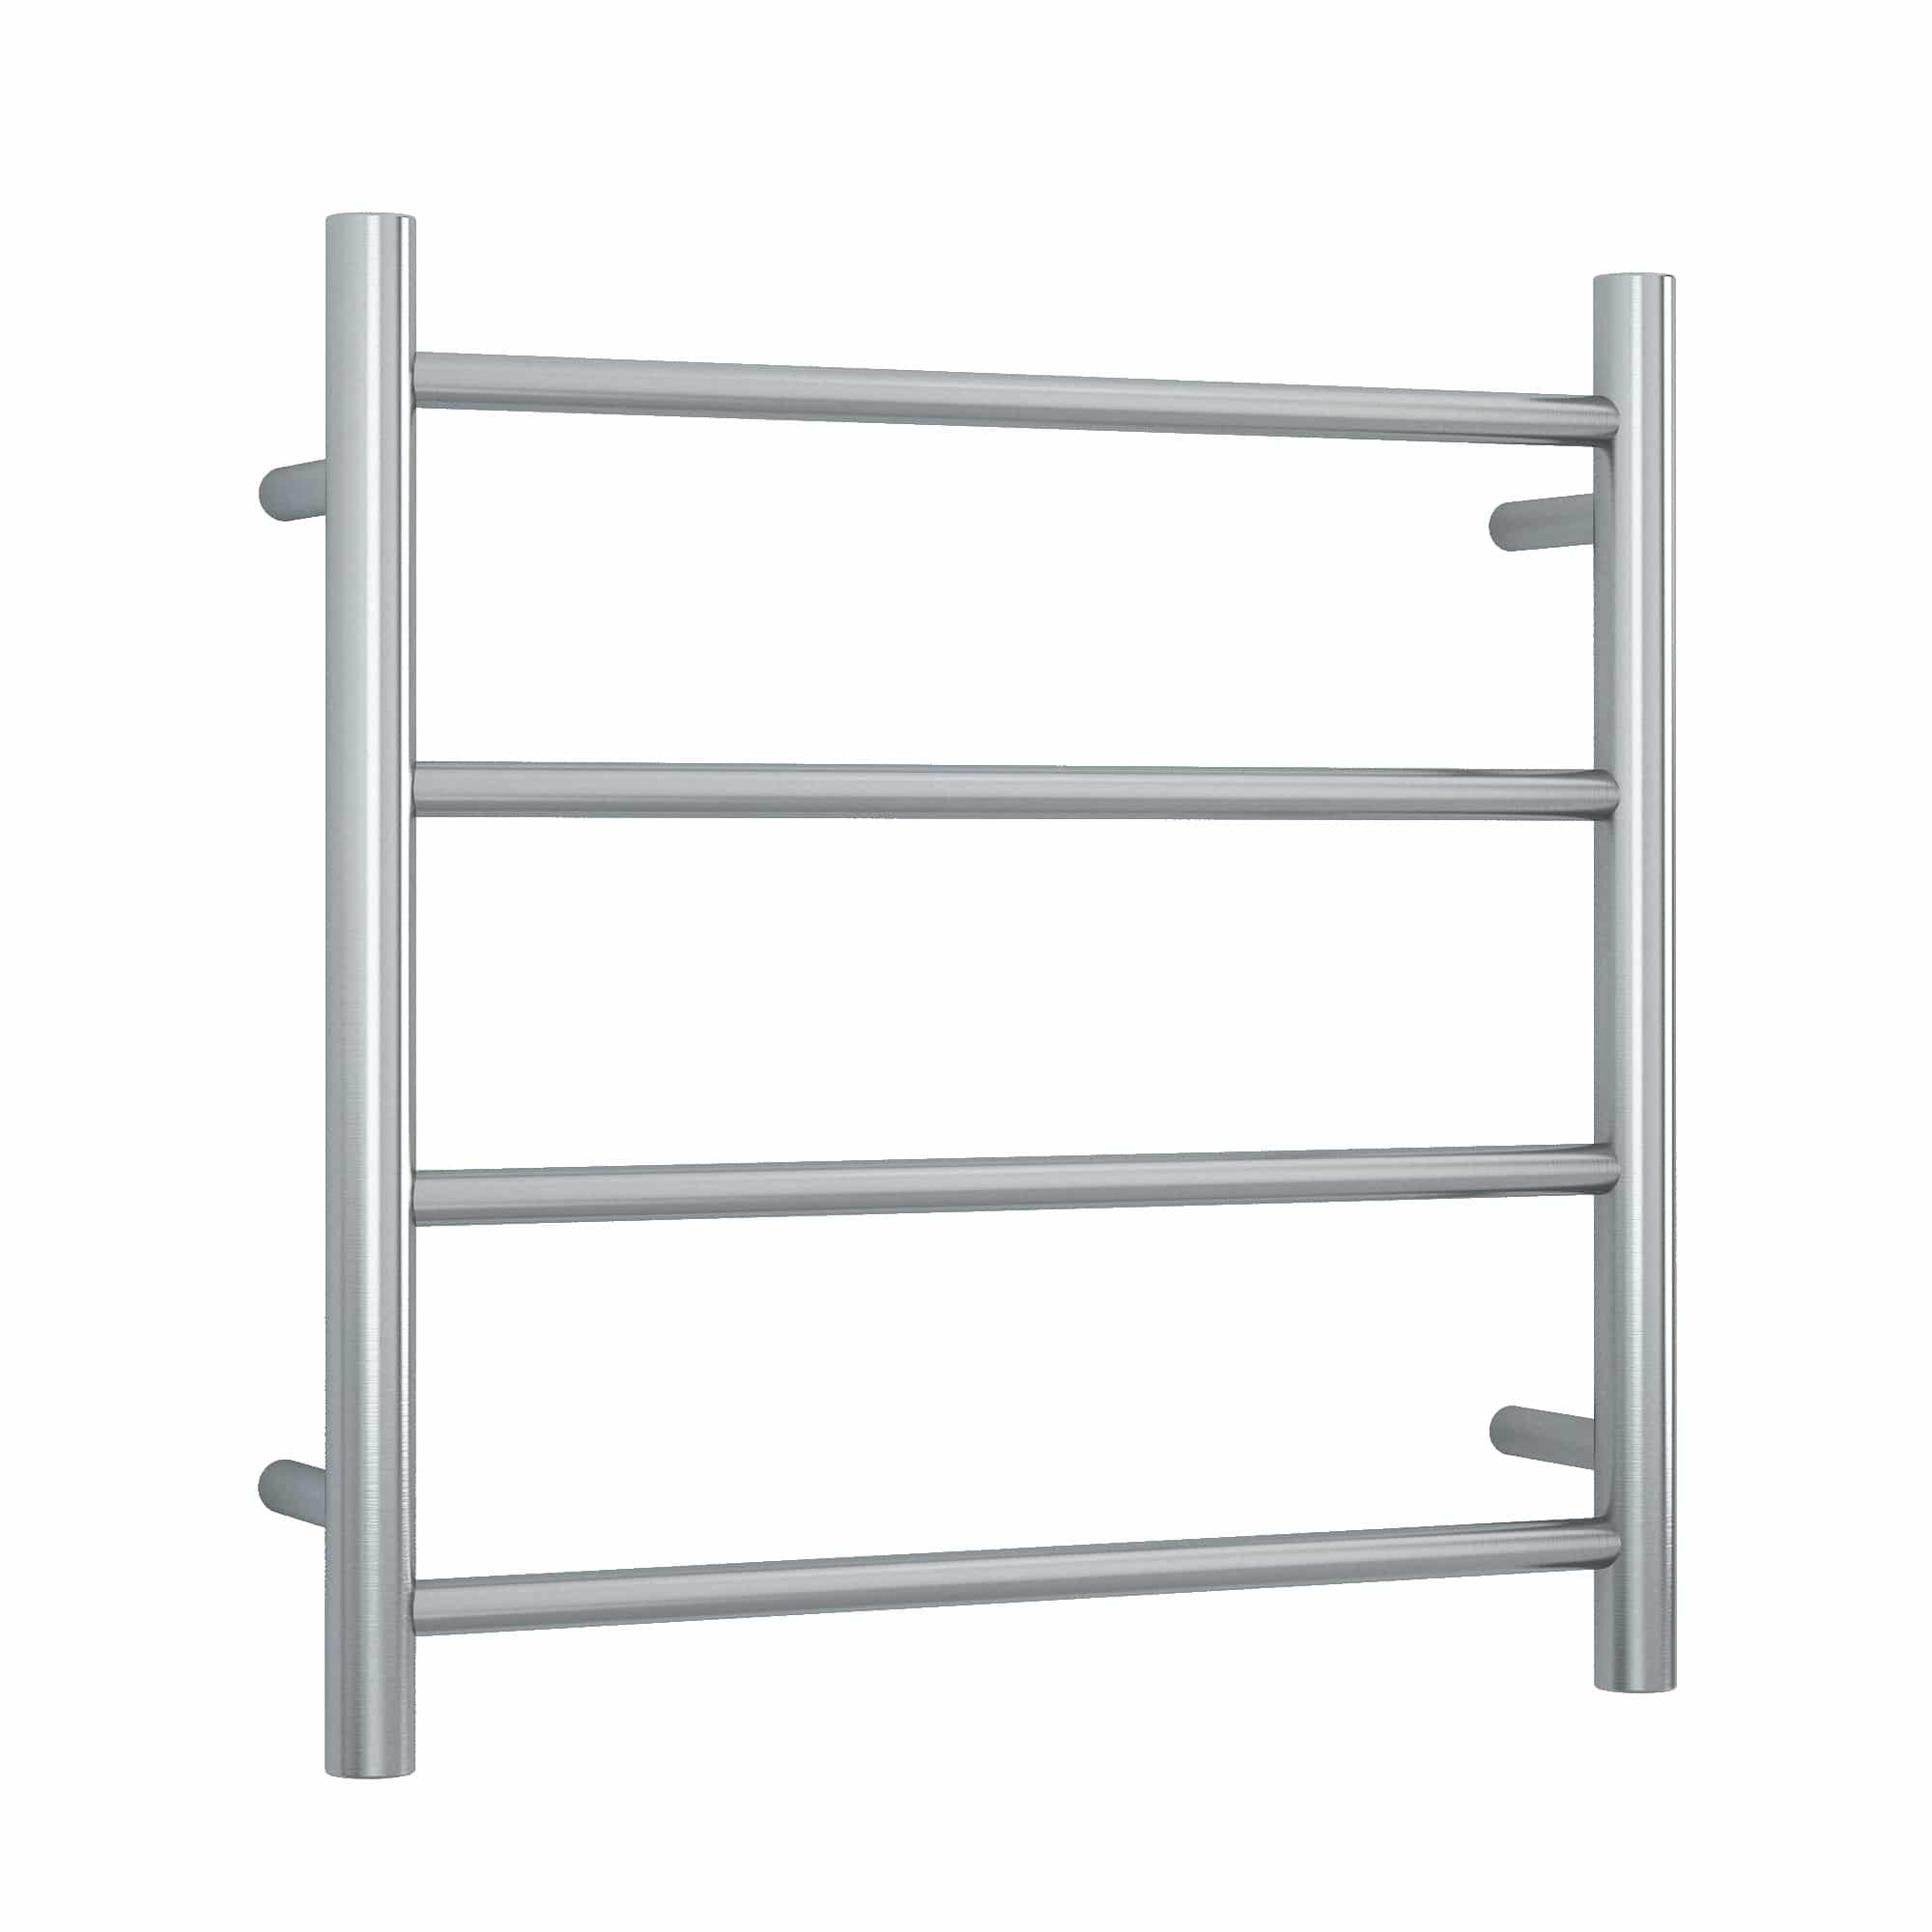 THERMOGROUP STRAIGHT ROUND LADDER HEATED TOWEL RAIL BRUSHED 550MM